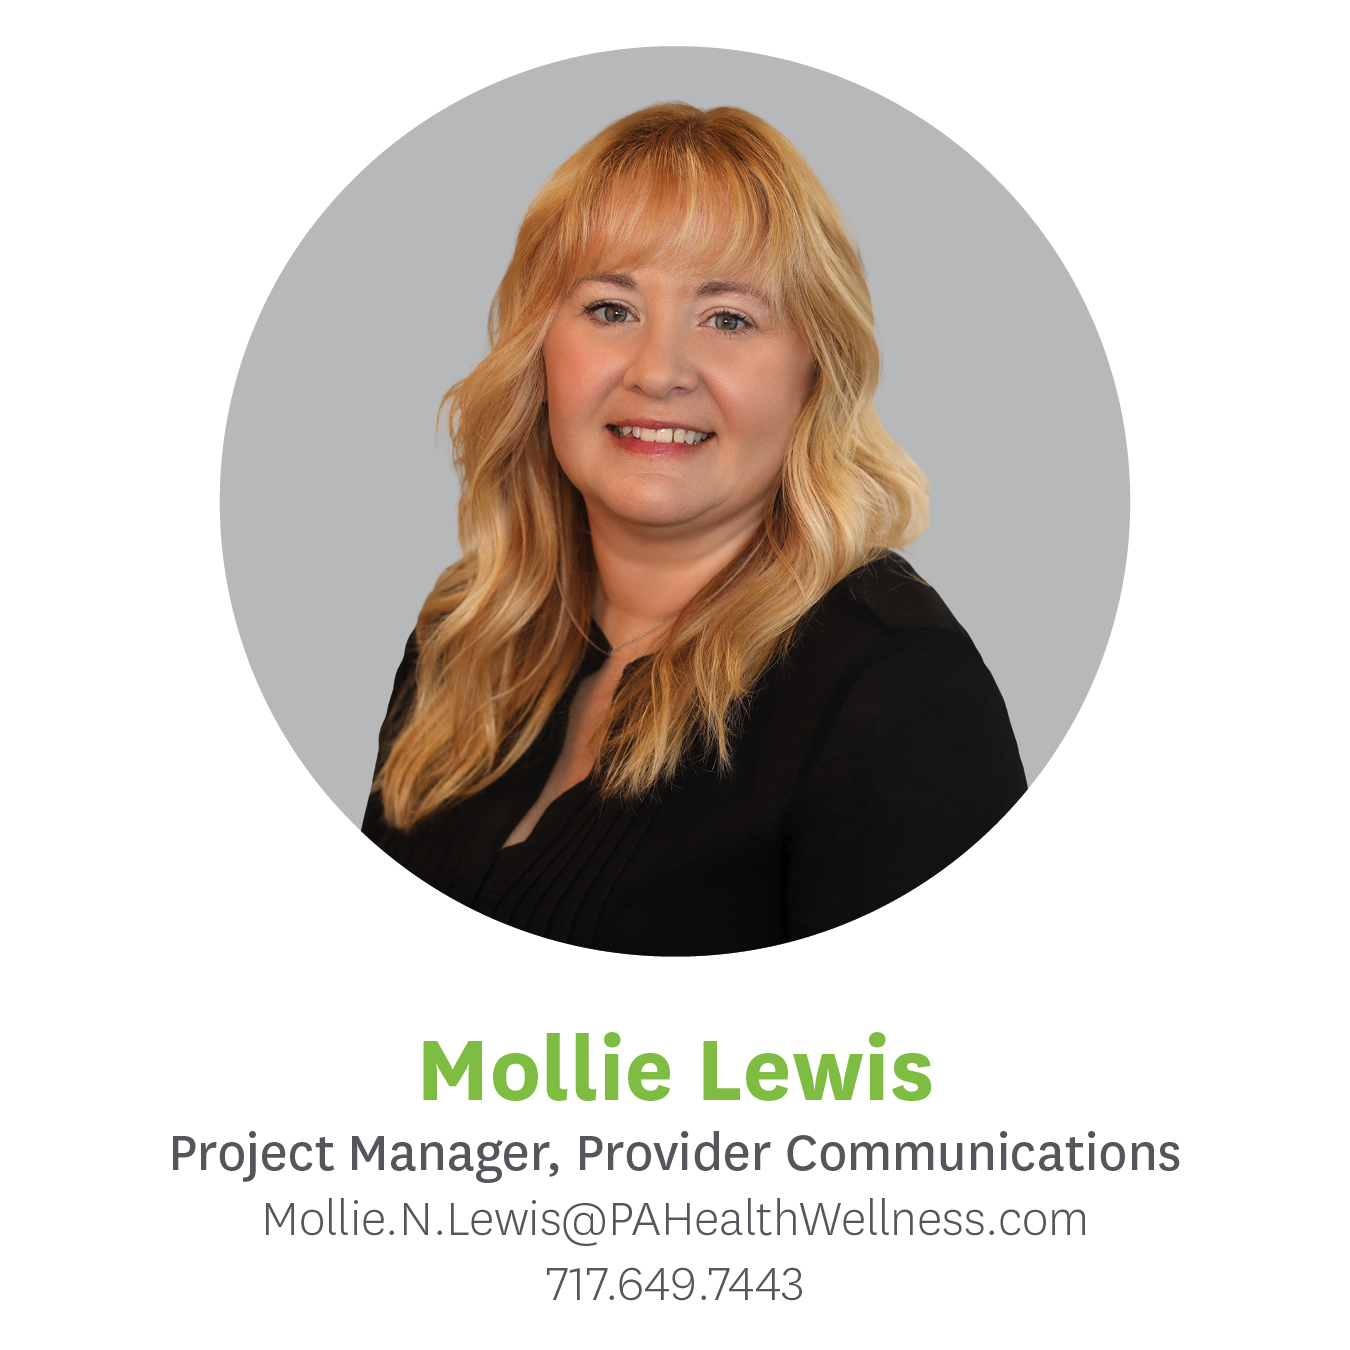 Mollie Lewis, Project Manager, Provider Communications, Mollie.N.Lewis@pahealthwellness.com, 717.649.7443